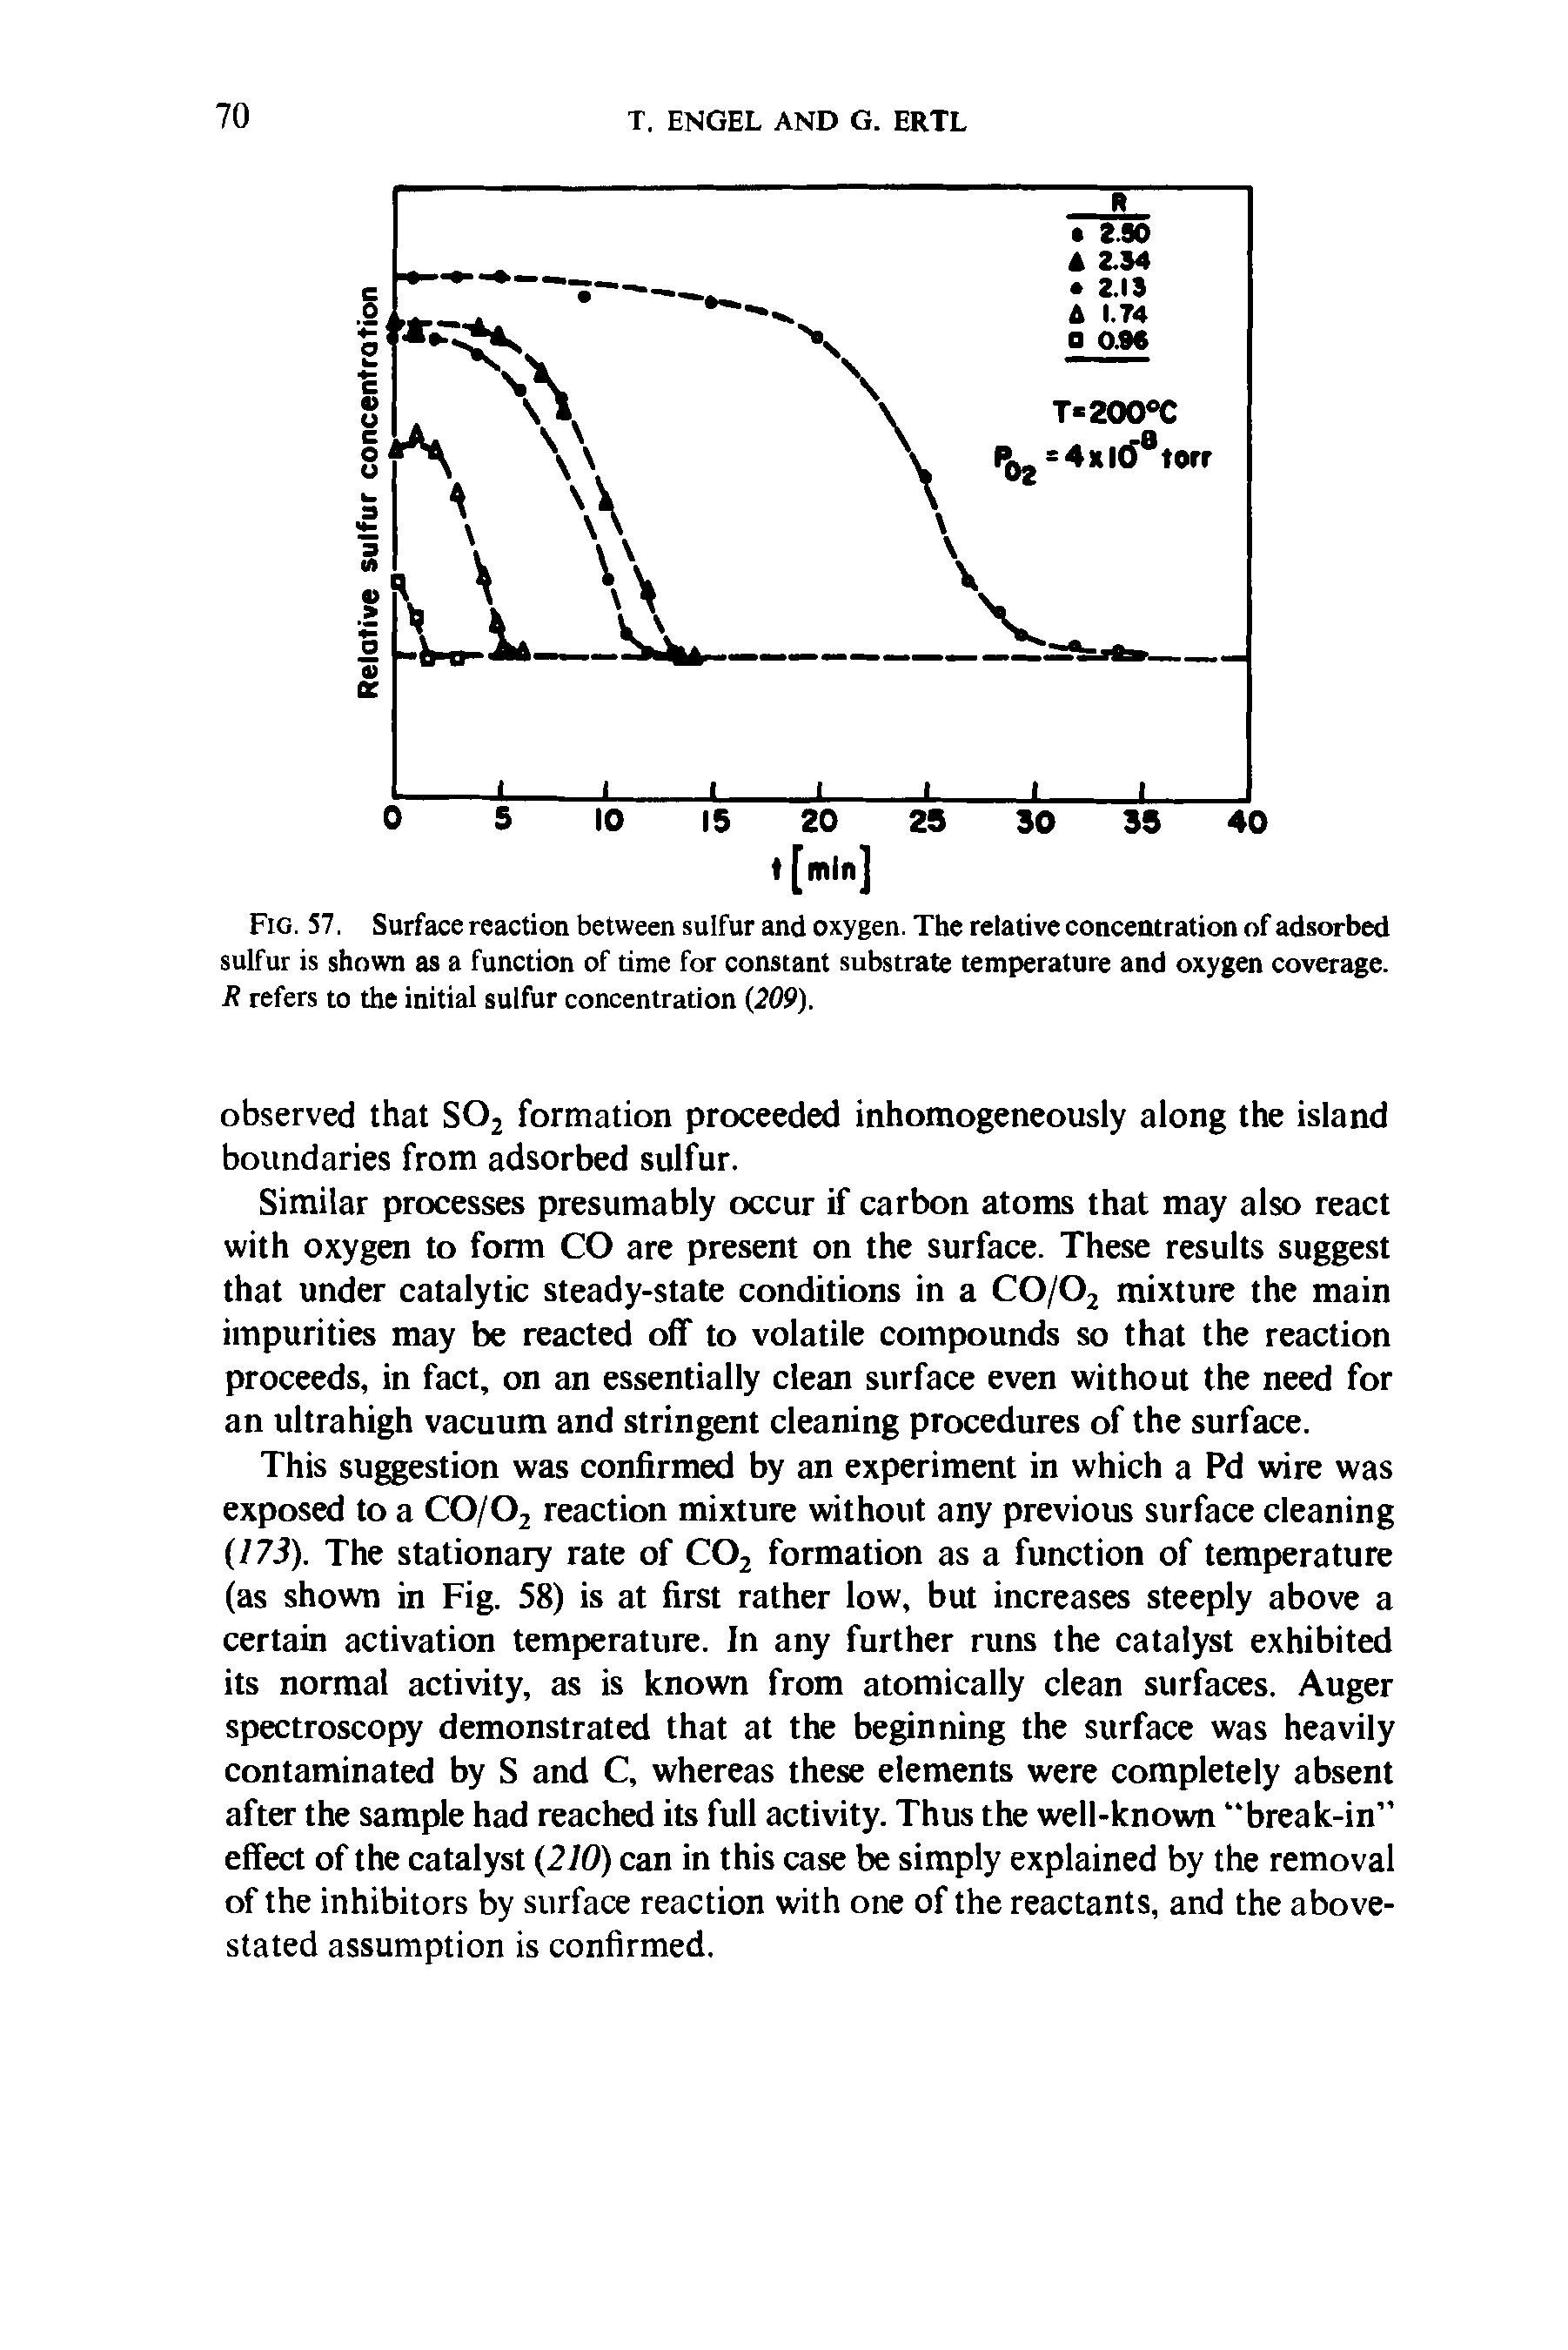 Fig. 57. Surface reaction between sulfur and oxygen. The relative concentration of adsorbed sulfur is shown as a function of time for constant substrate temperature and oxygen coverage. R refers to the initial sulfur concentration (209).